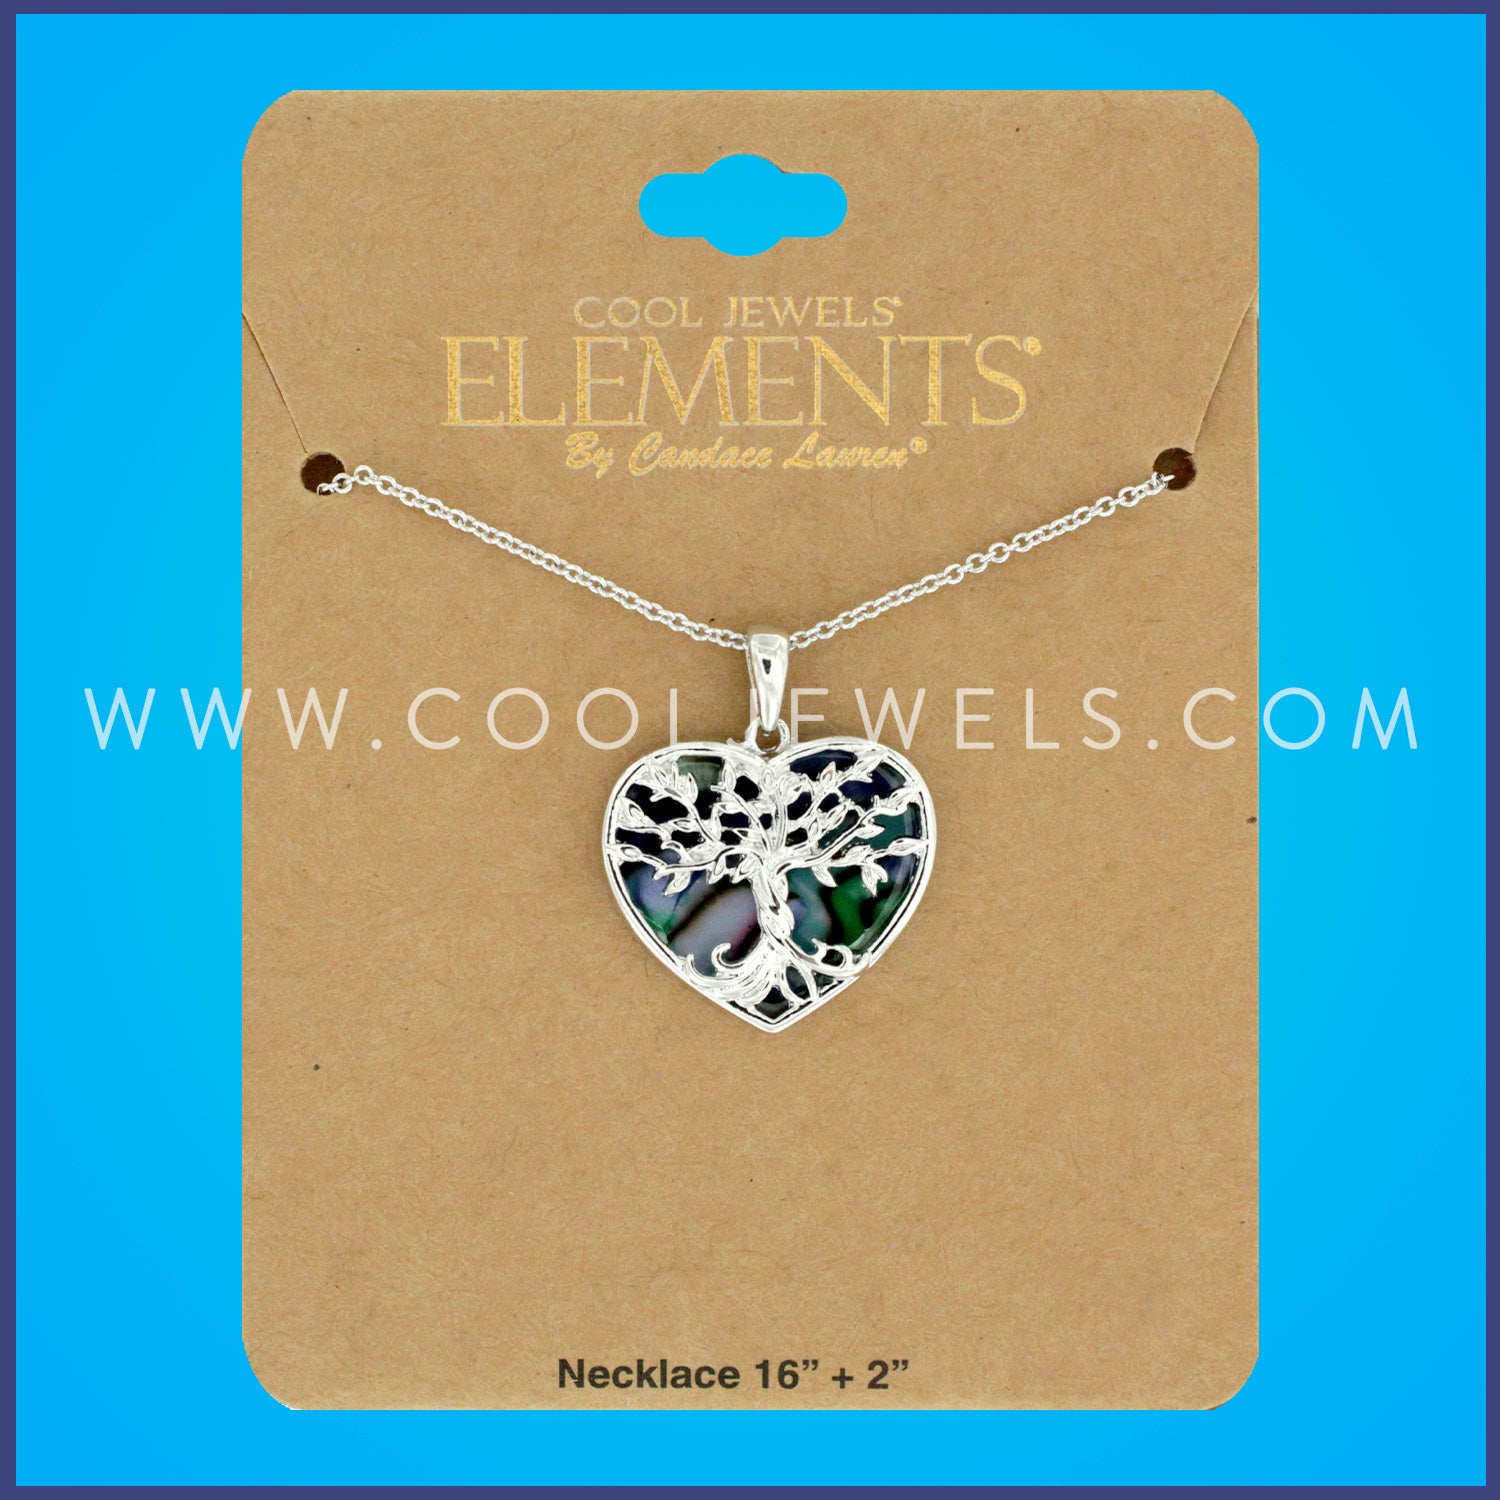 LINK CHAIN NECKLACE WITH HEART-SHAPED TREE PENDANT  CARDED